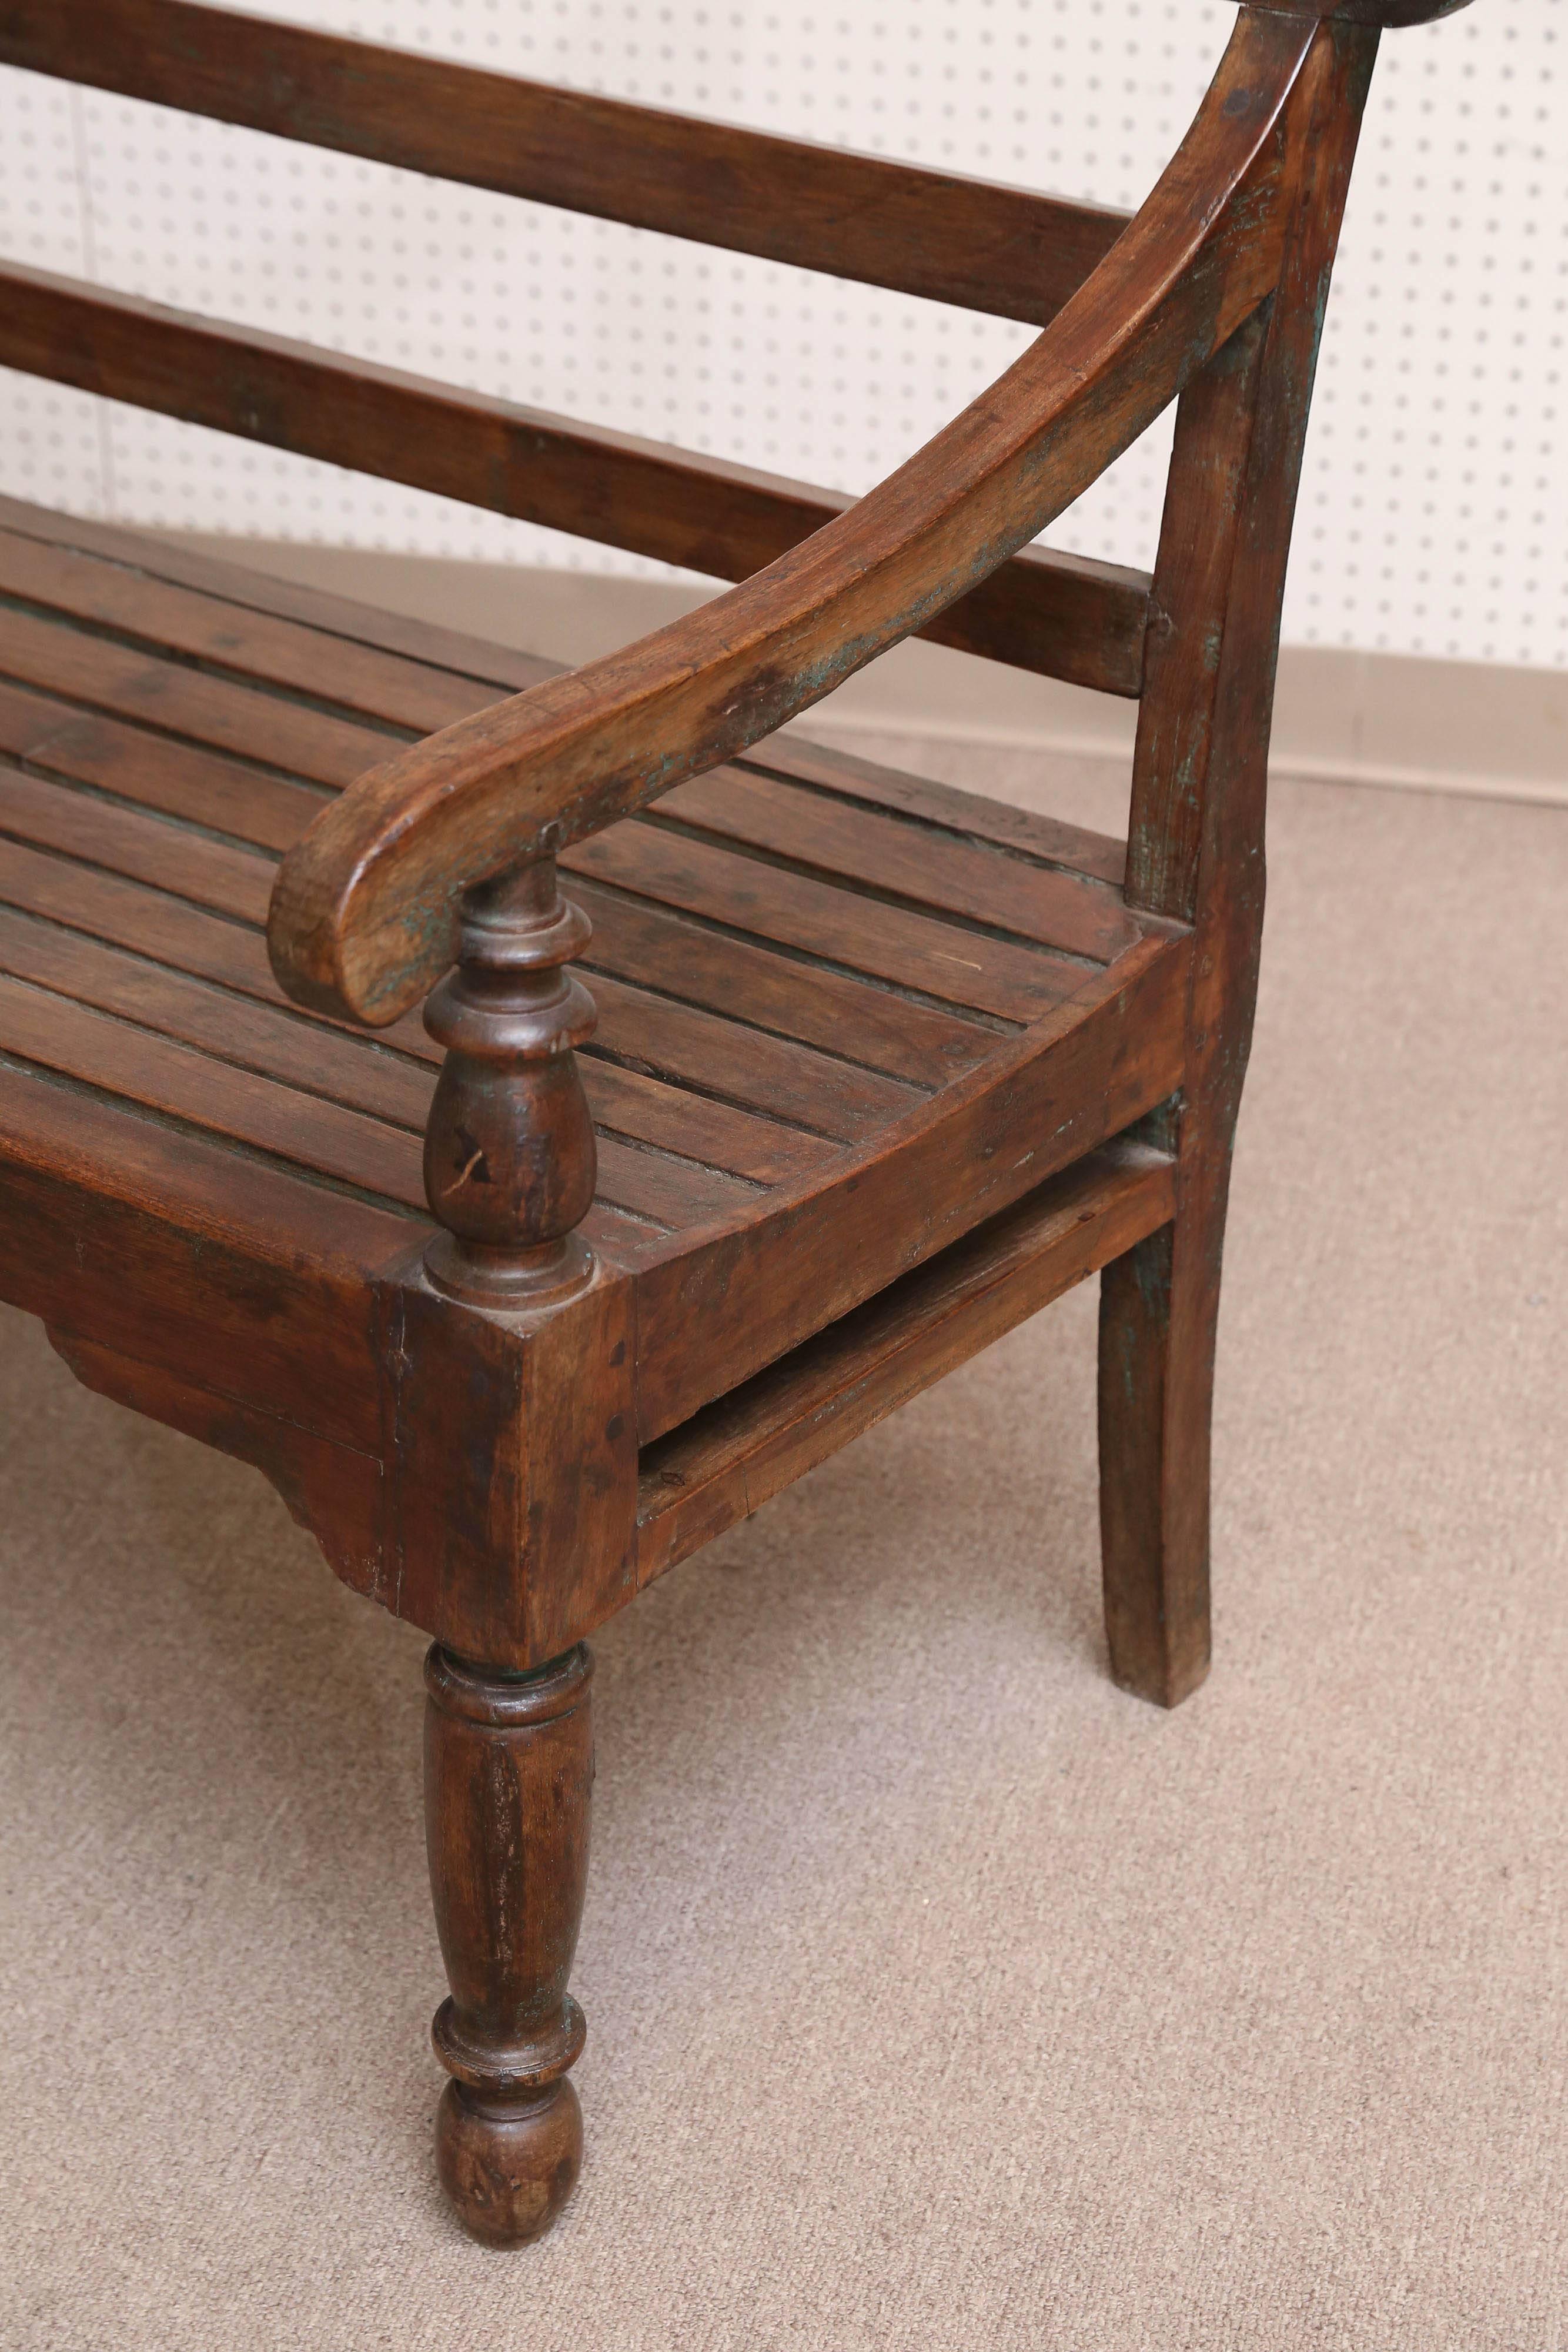 This is a 19th century, solid teak wood bench with five legs. It has armrest and a back support. It is contoured for comfort. Benches like this one were used in the corridors of colonial homes where they were partially exposed to the elements. The